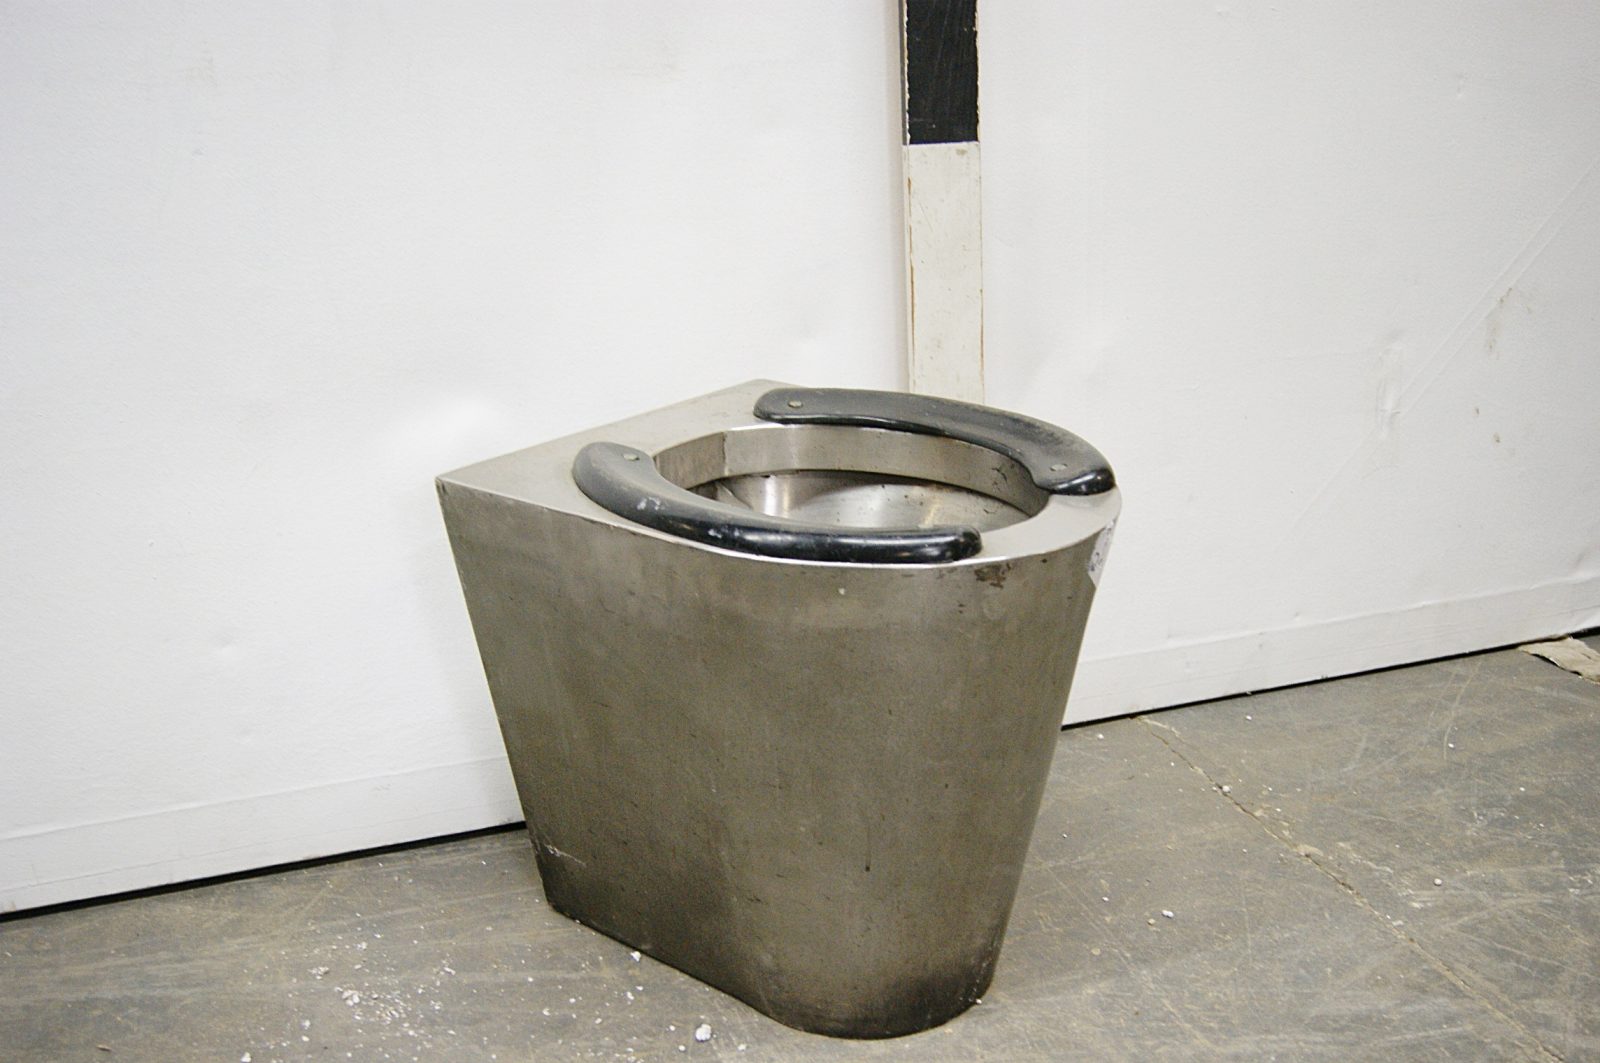 0770043 Stainless Steel Prison Toilet ( H 43cm x 37 x 45 ) x 1 off Stockyard Prop and Backdrop